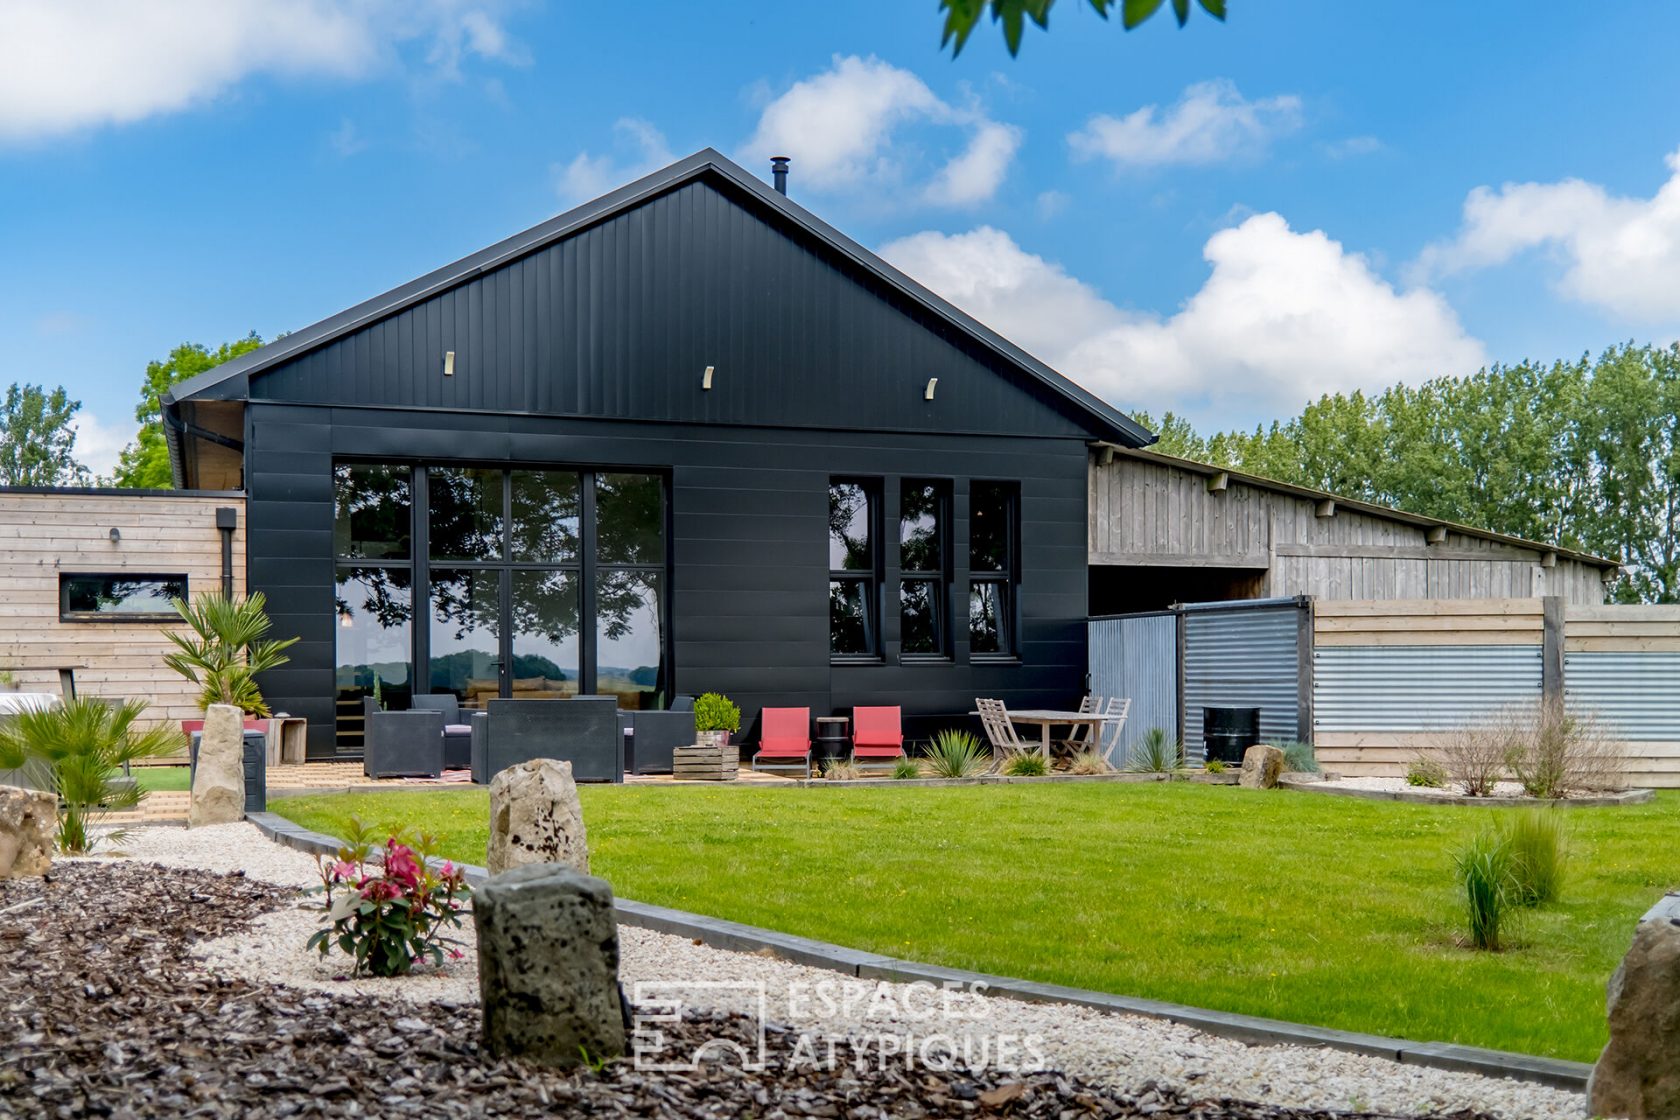 Former agricultural building renovated by an architect with equestrian estate